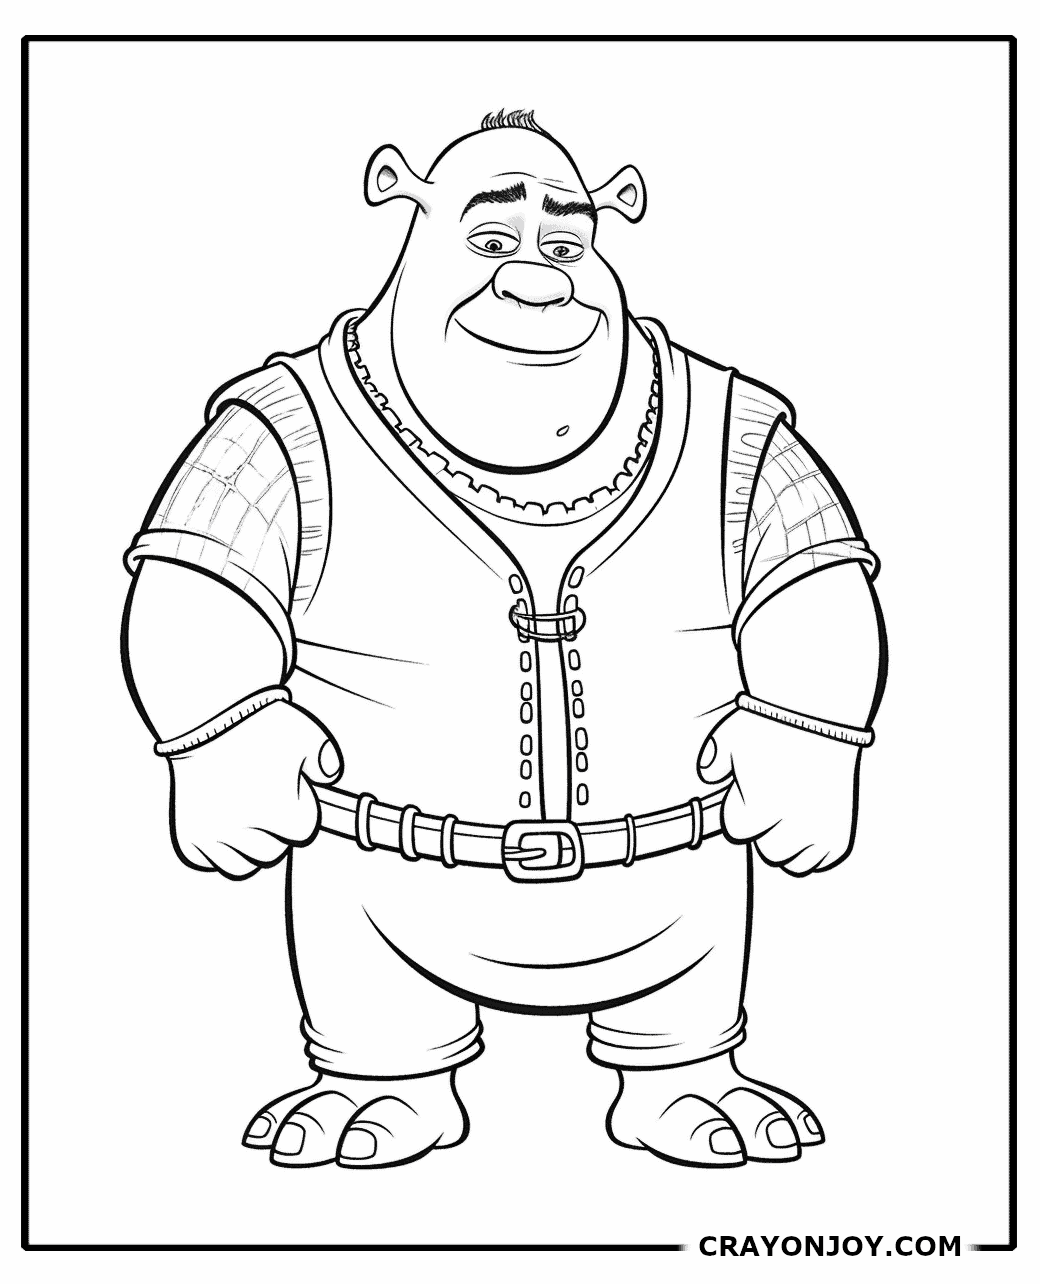 Free Printable Shrek Coloring Pages for Kids & Adults